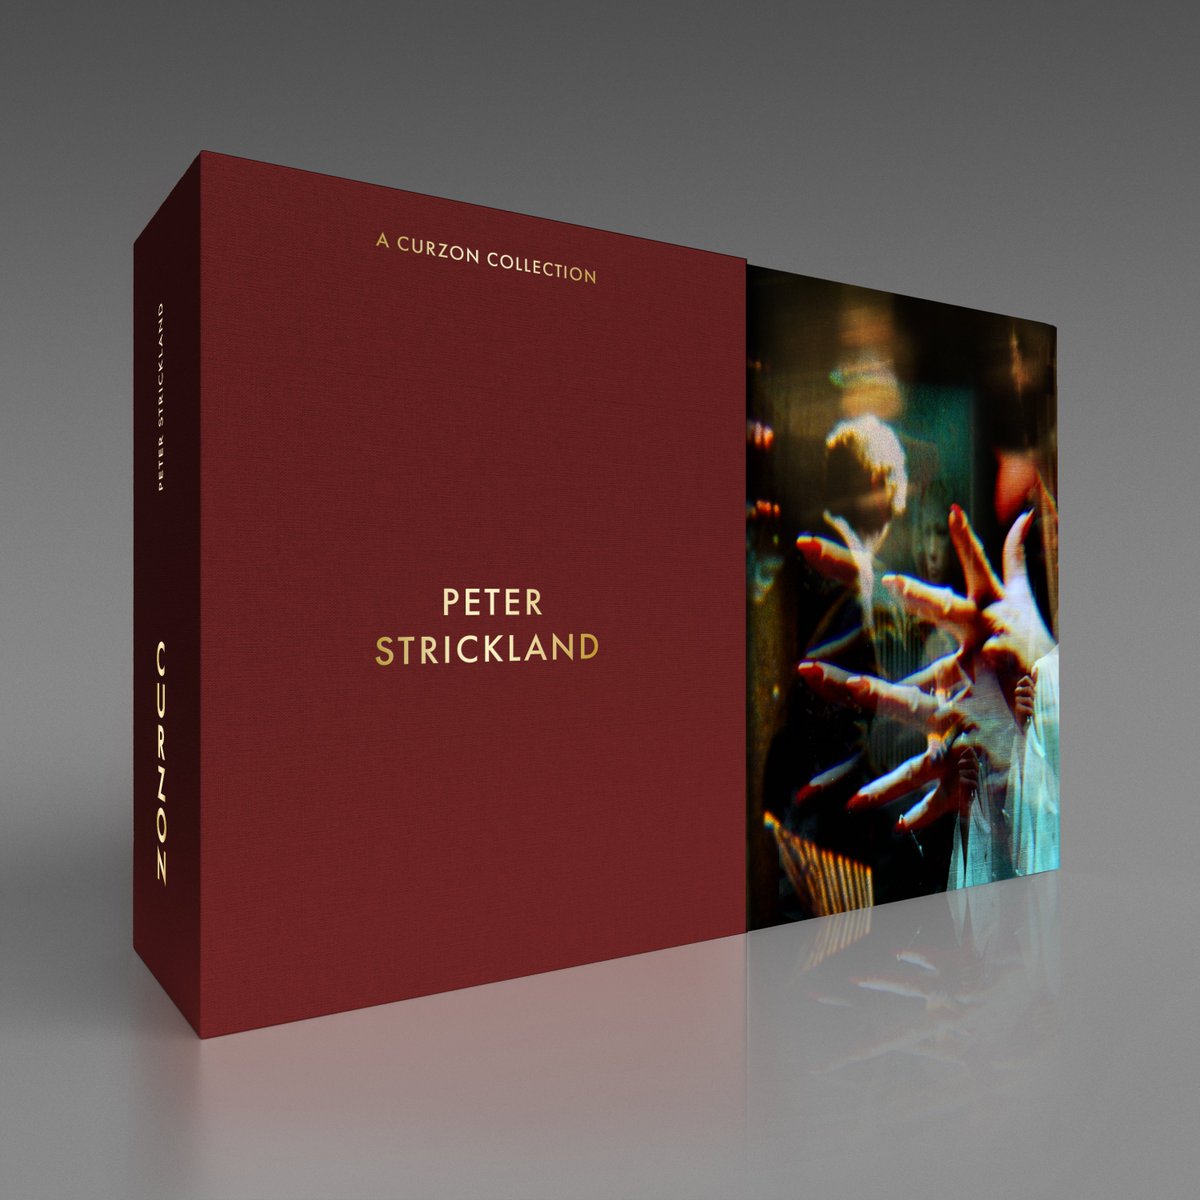 Now's your chance to celebrate a cult-cinema favourite with our limited-edition Peter Strickland Blu-ray collection. It includes all his feature films, dozens of rare shorts (many unseen!), an editorial booklet and more in a stunning 6-disc set. Pre-order now.